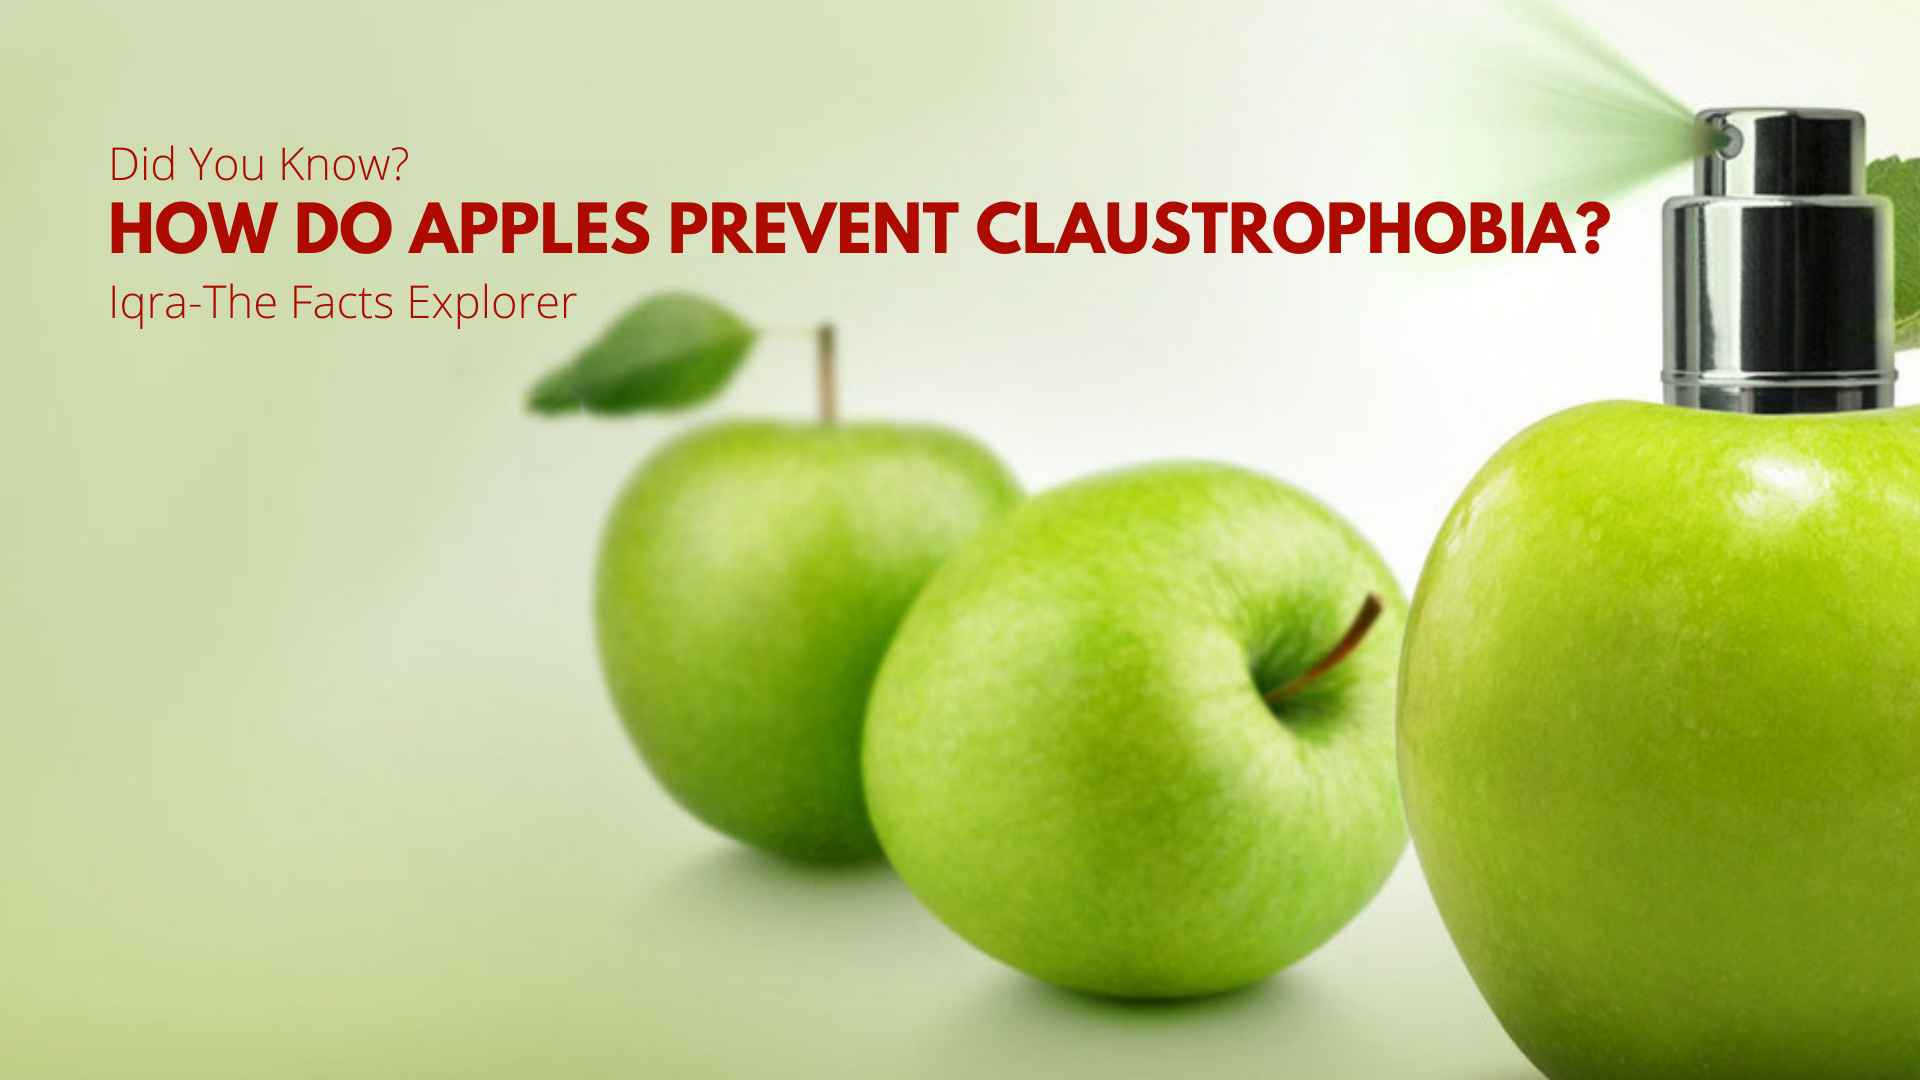 The Scent of Green Apple Prevents Claustrophobia?